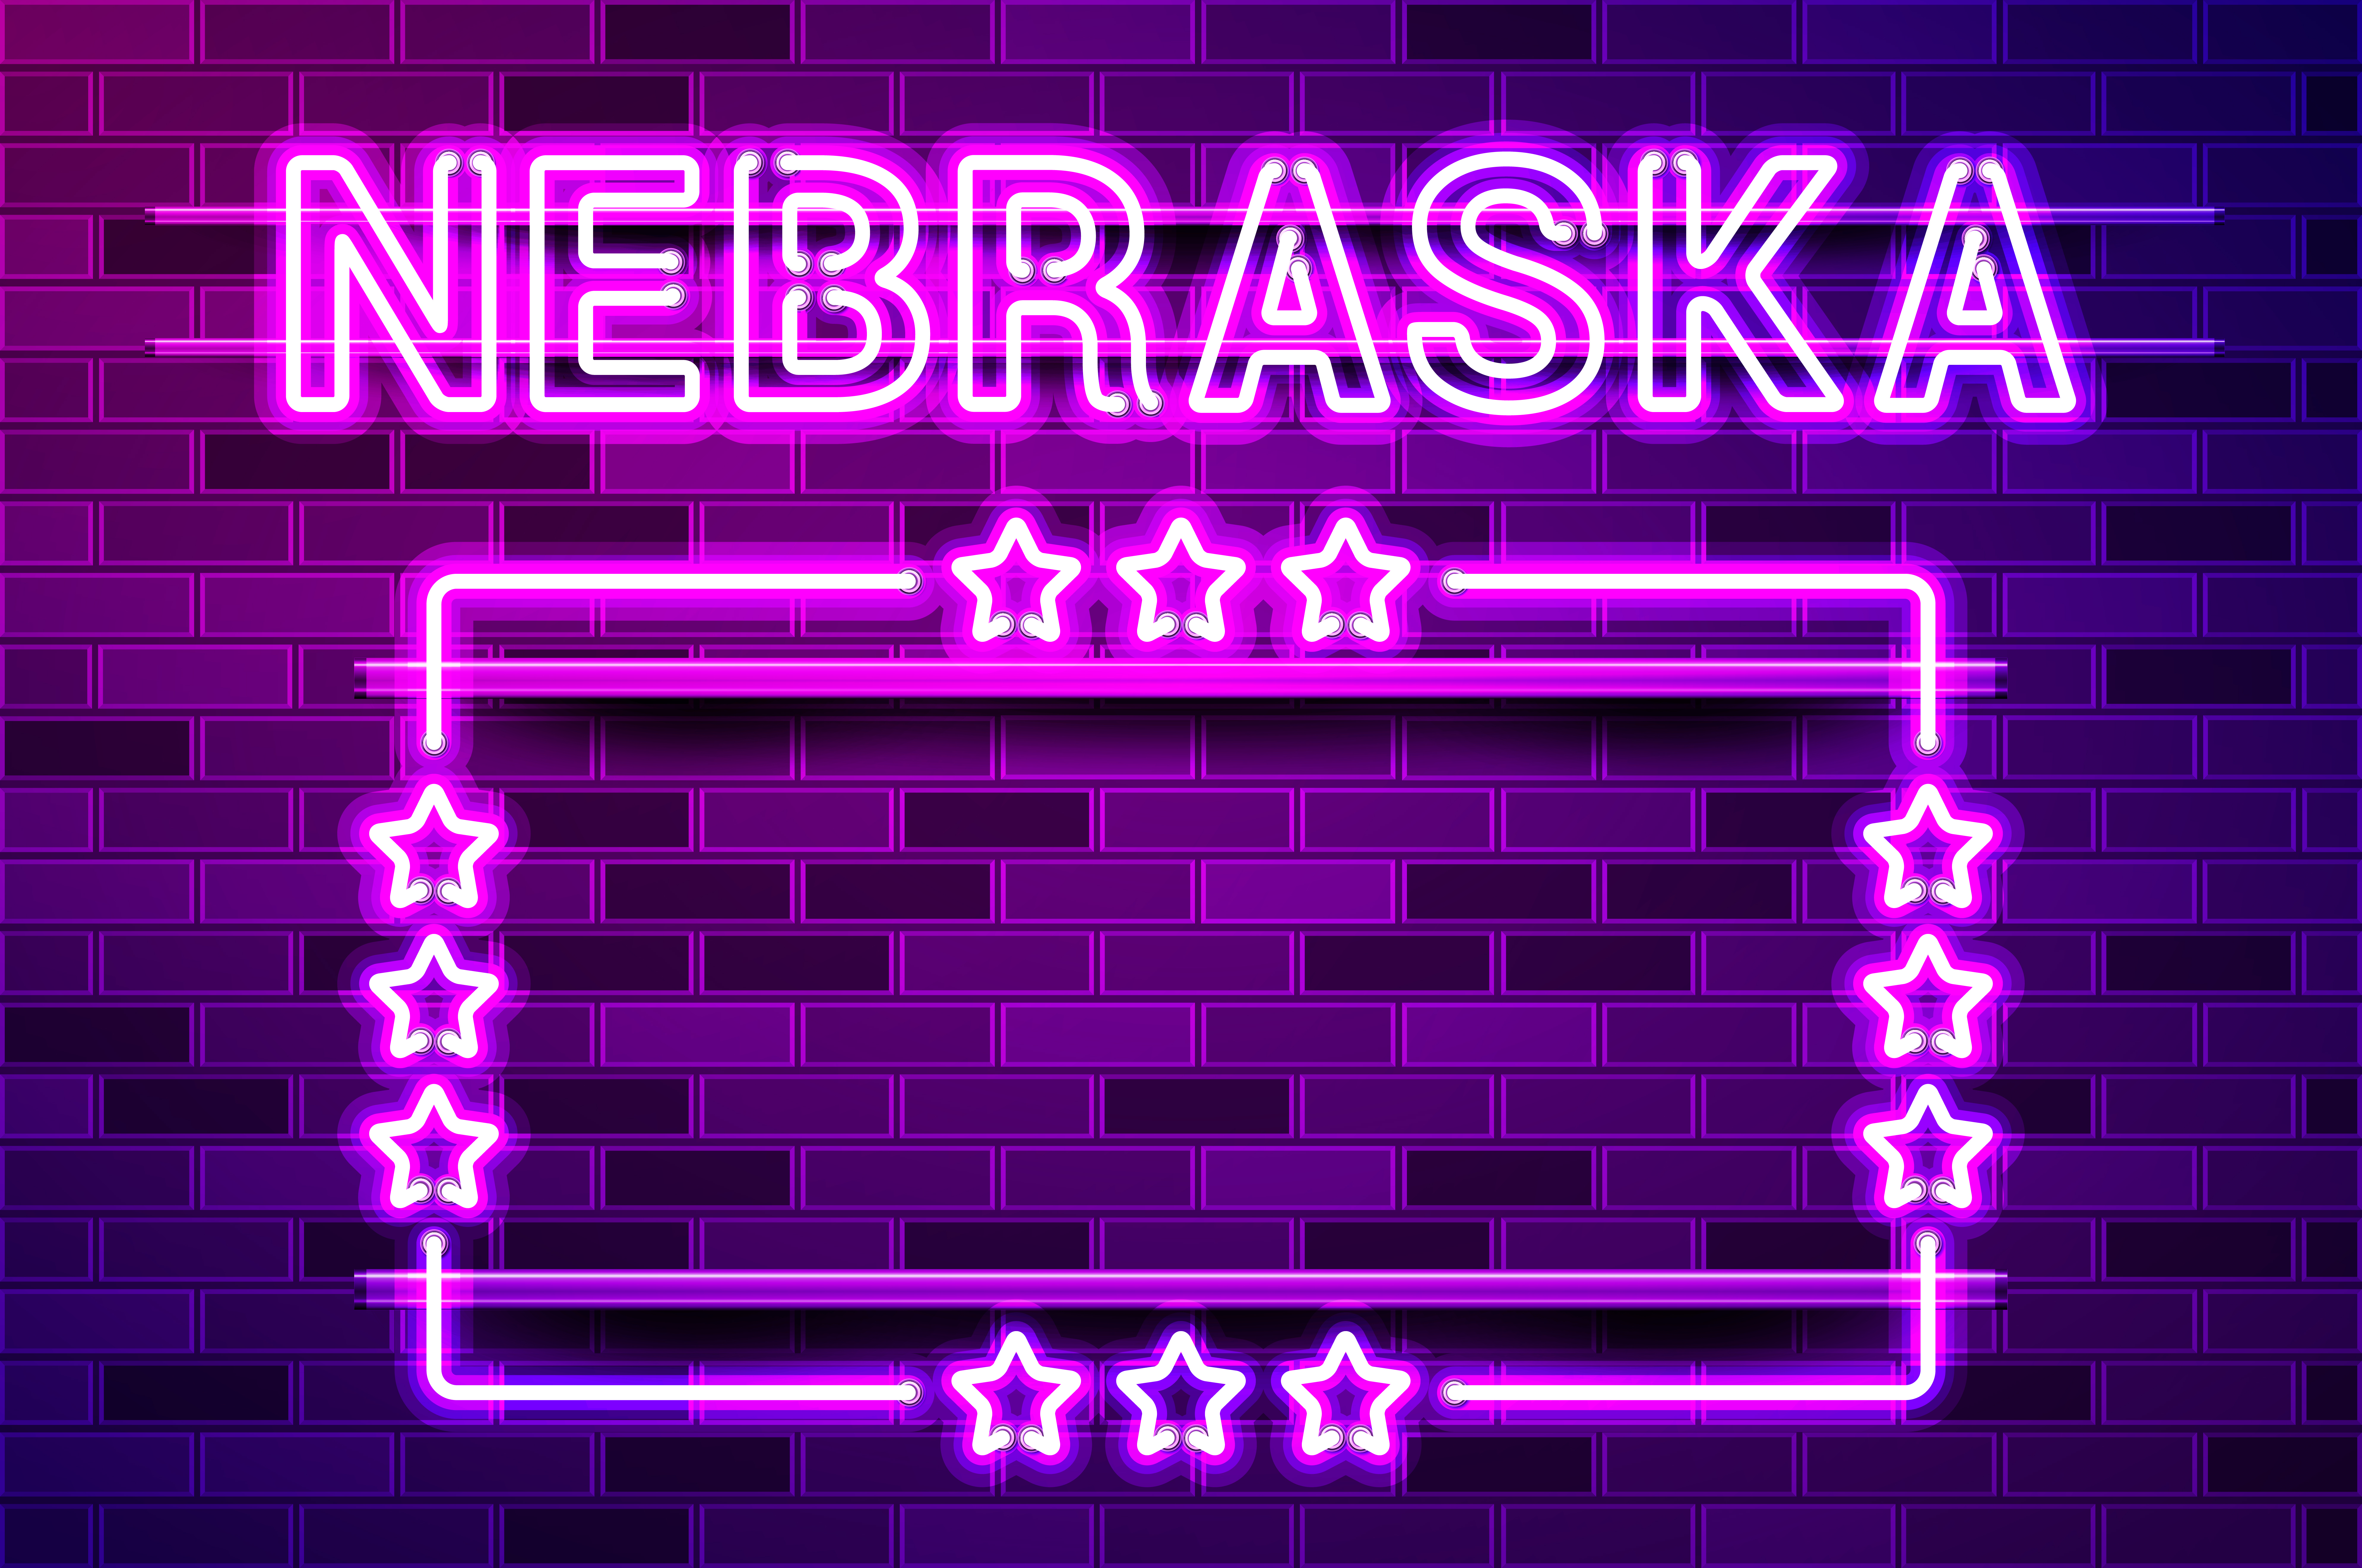 Nebraska US State glowing purple neon lettering and a rectangular frame with stars. Realistic vector illustration. Purple brick wall, violet glow, metal holders.. Nebraska US State glowing purple neon lettering and a rectangular frame with stars